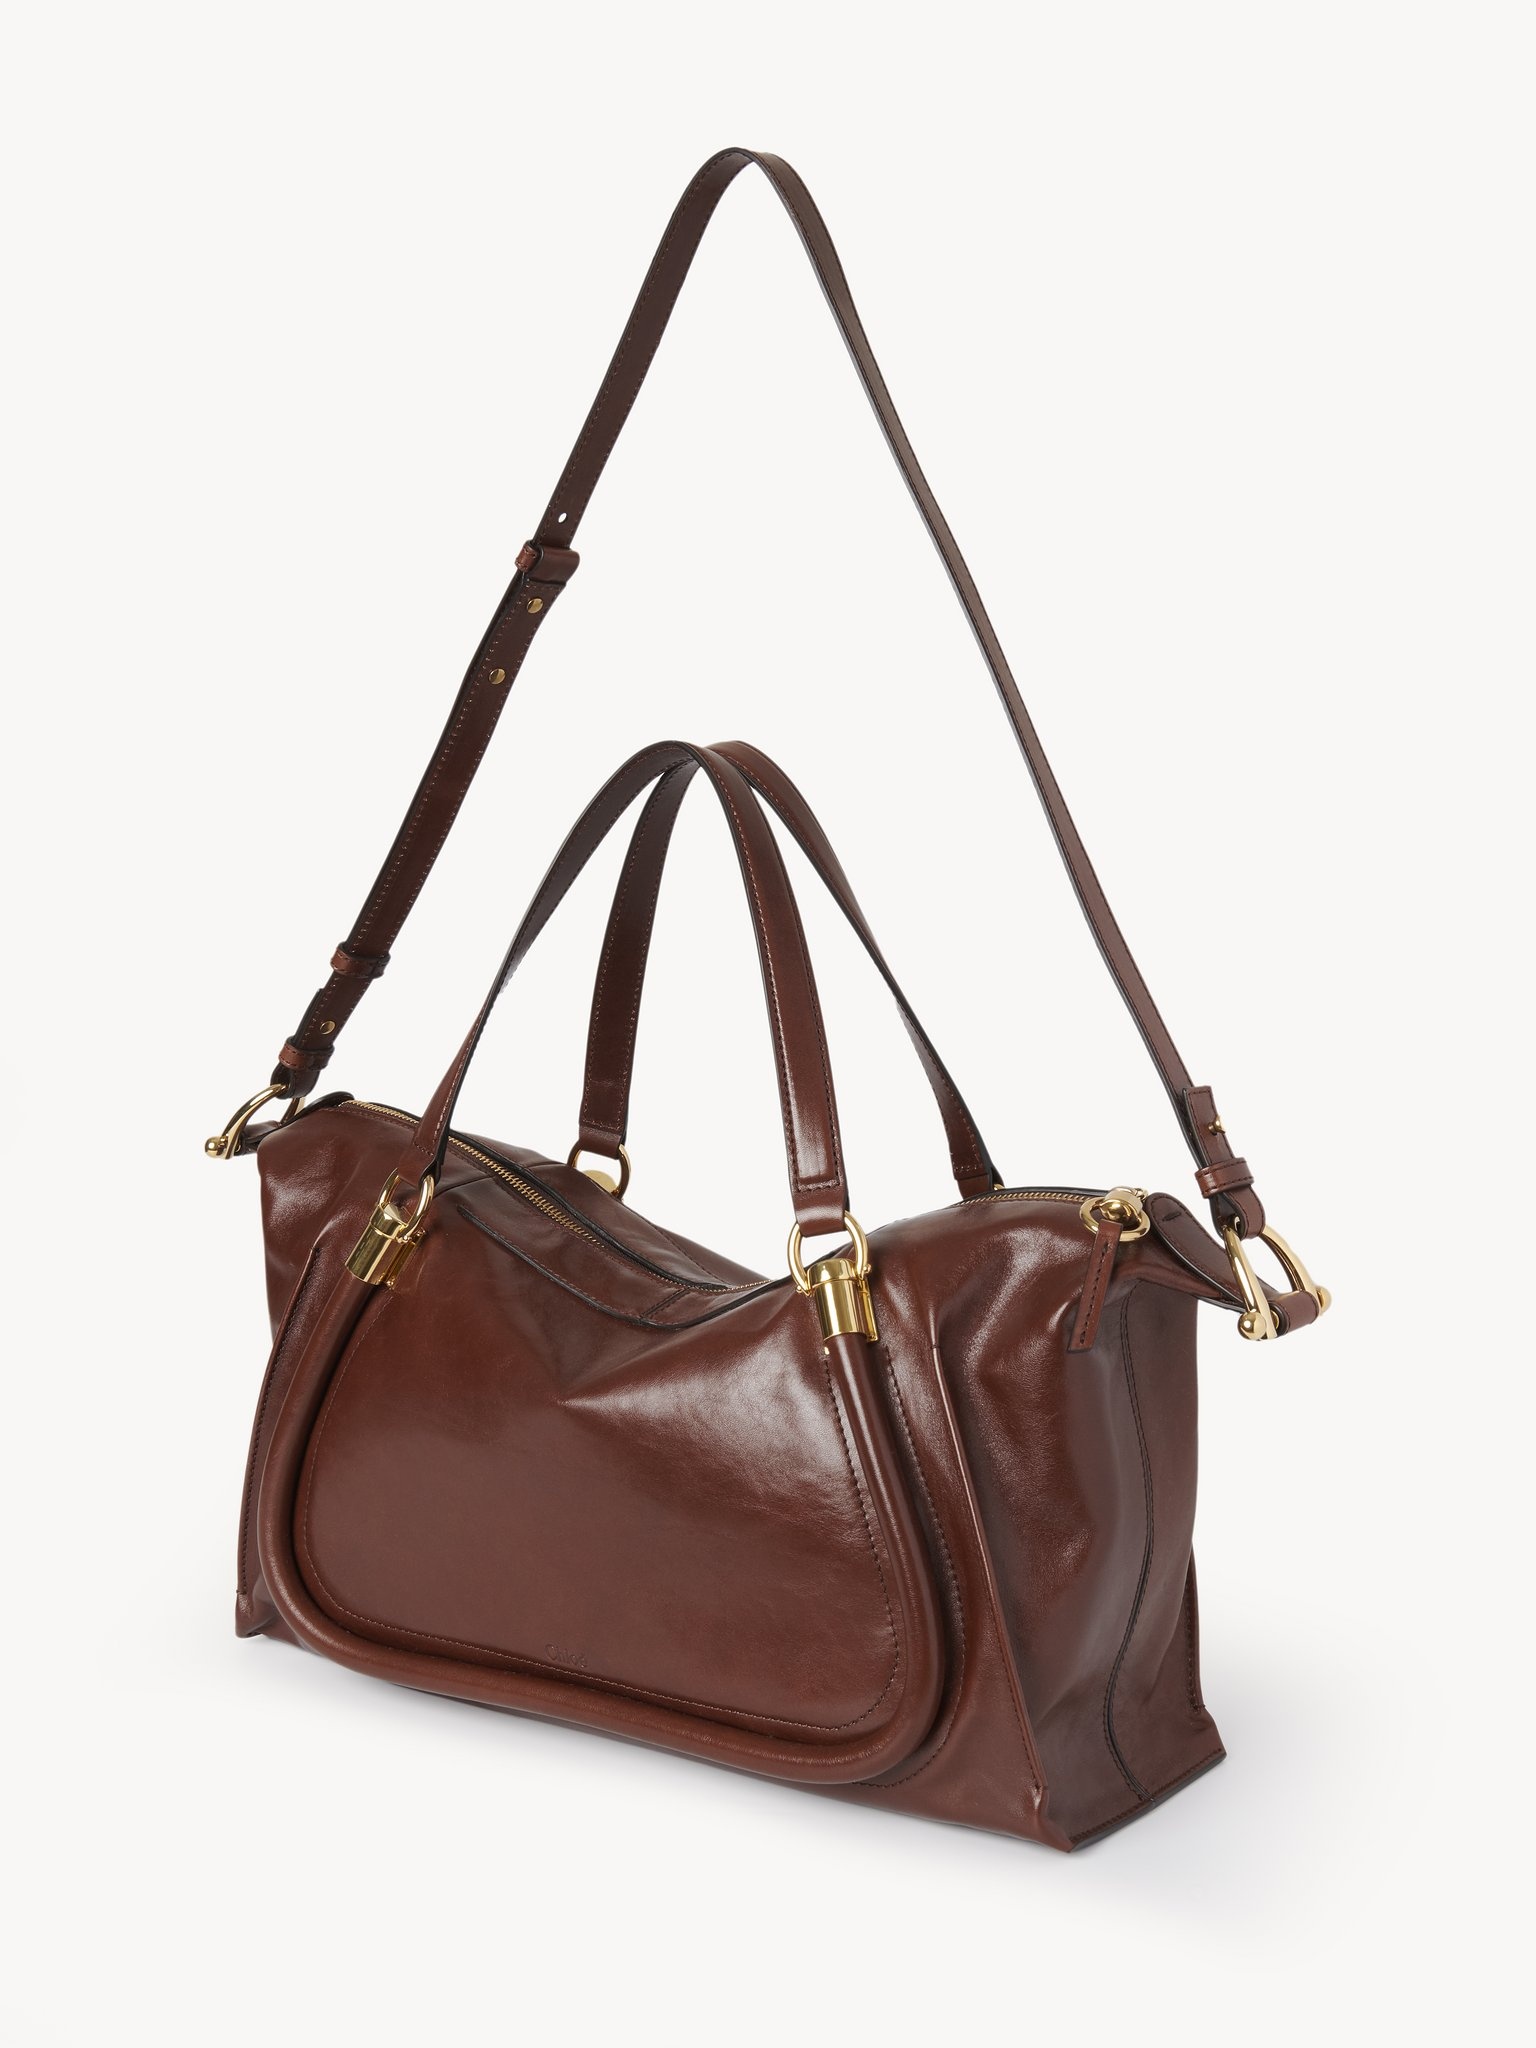 PARATY 24 BAG IN SOFT LEATHER - 3